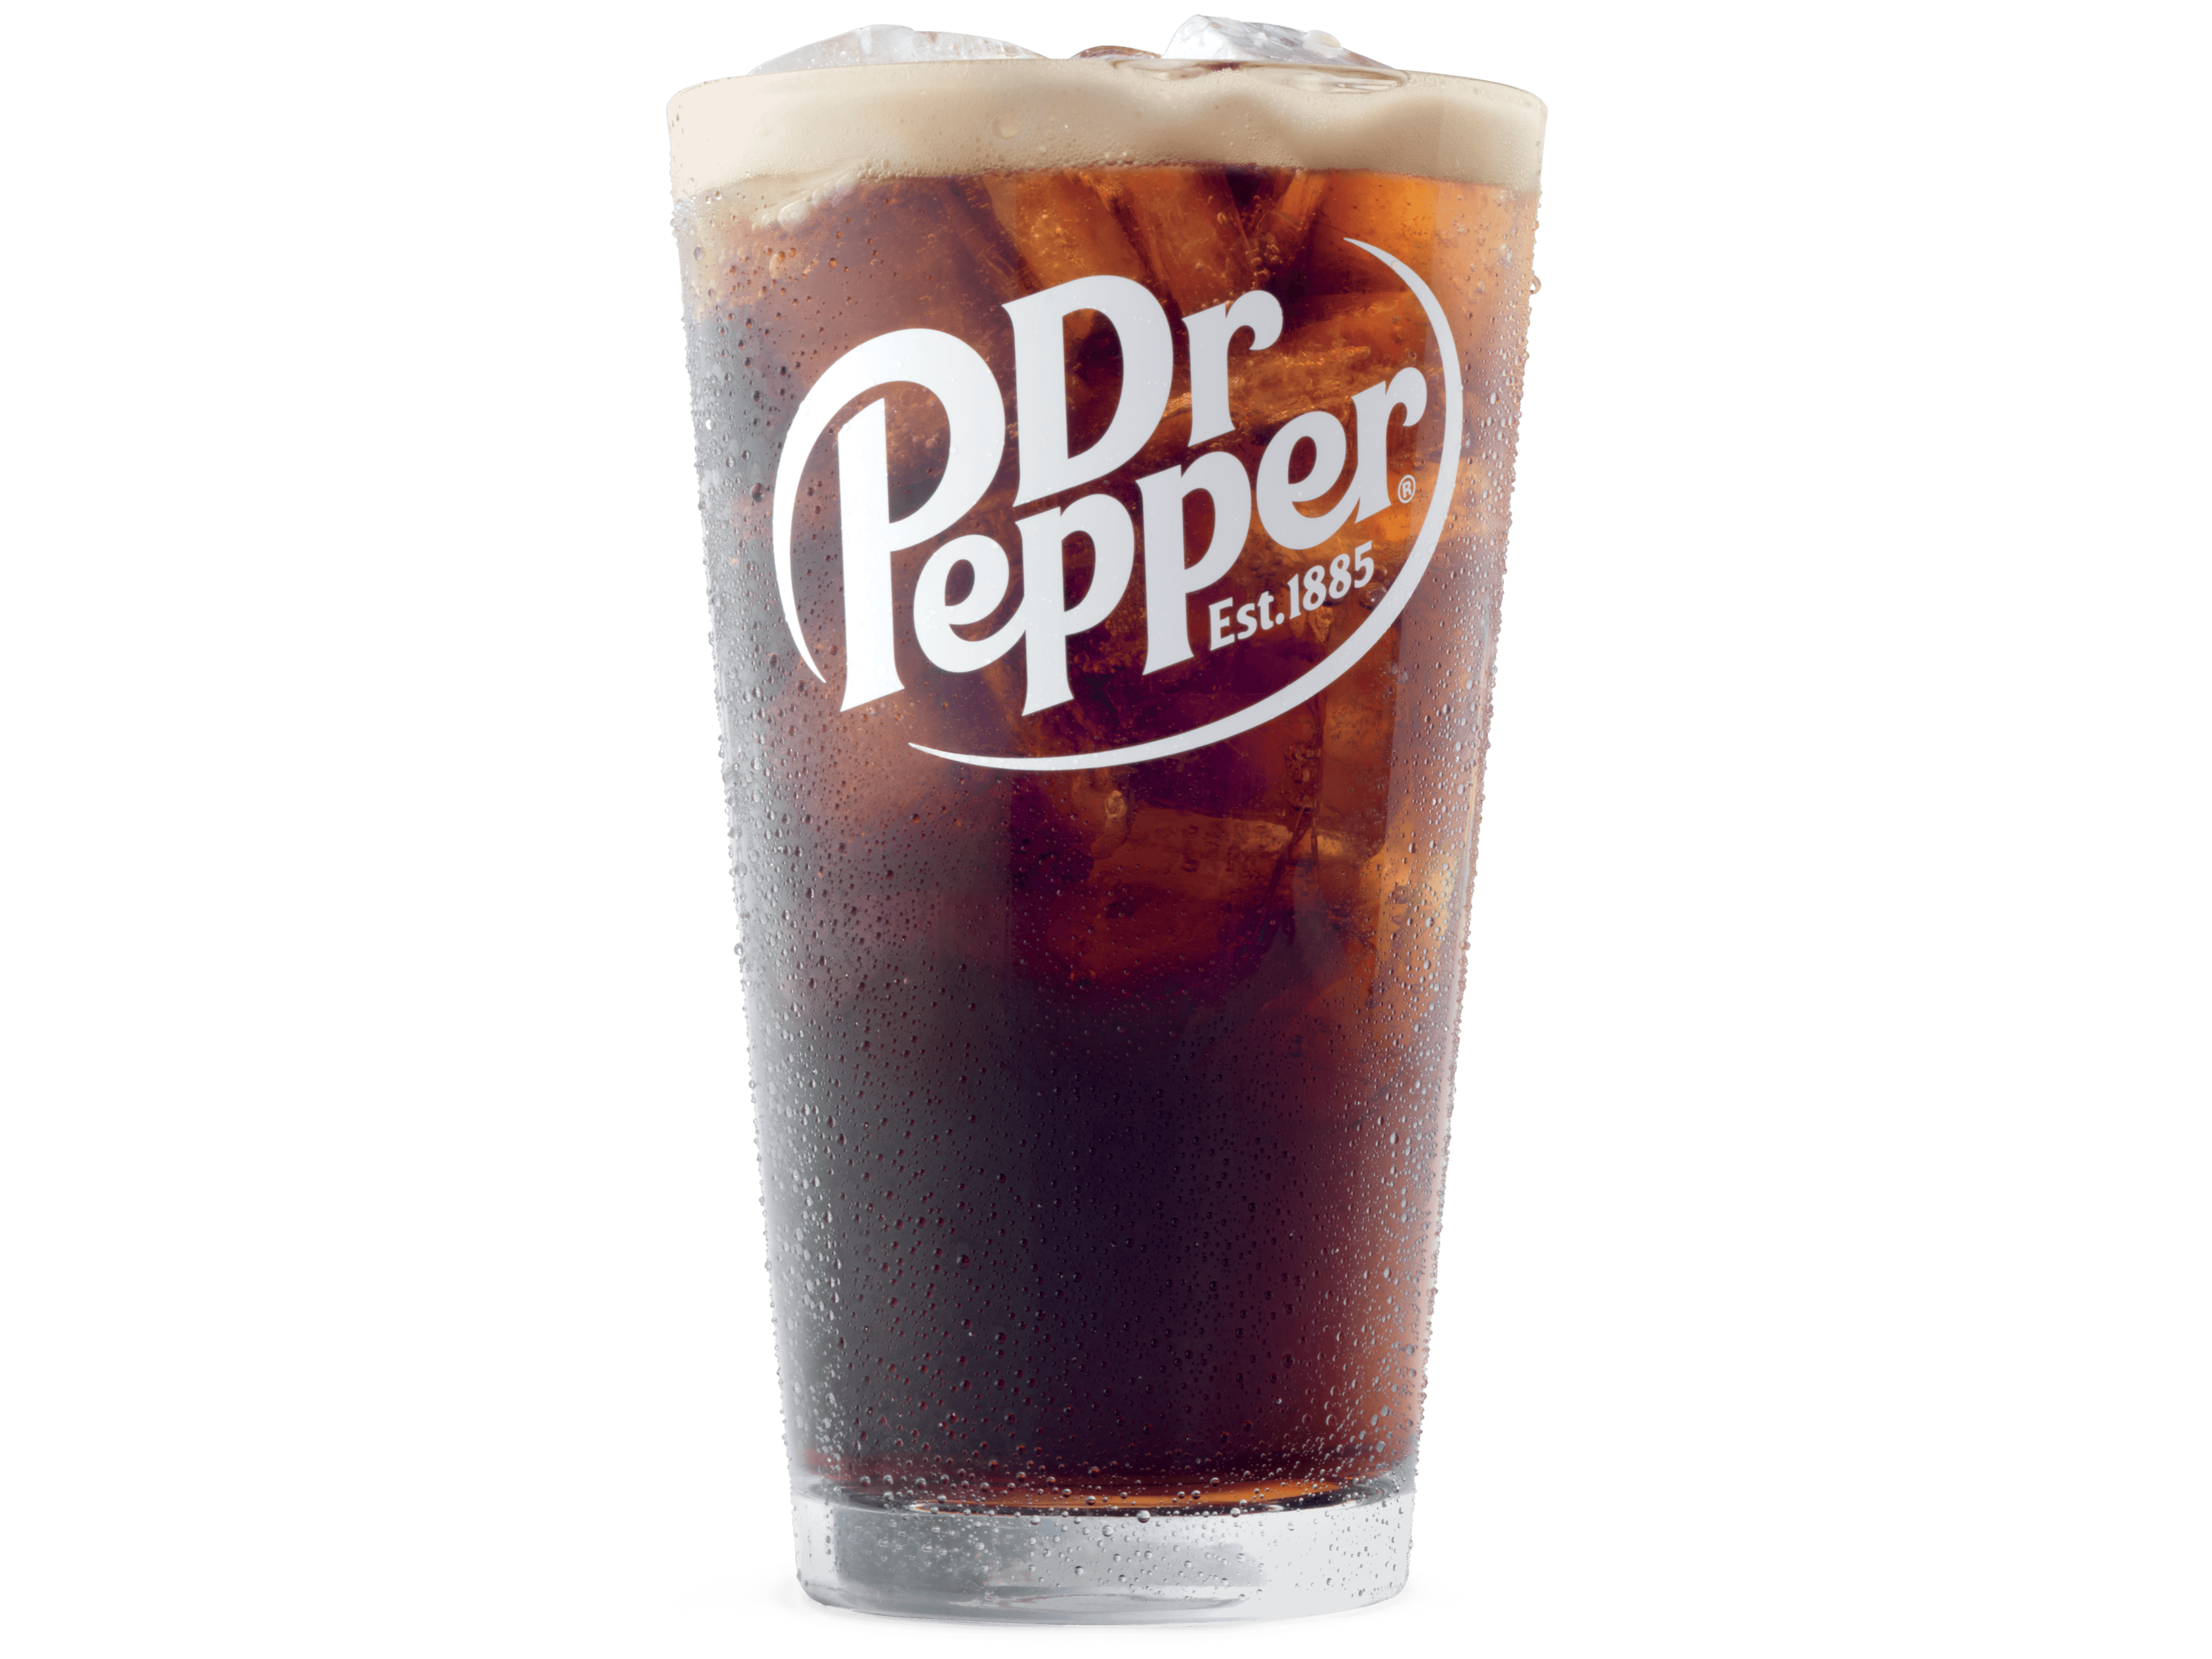 Calories in Arby's Dr Pepper